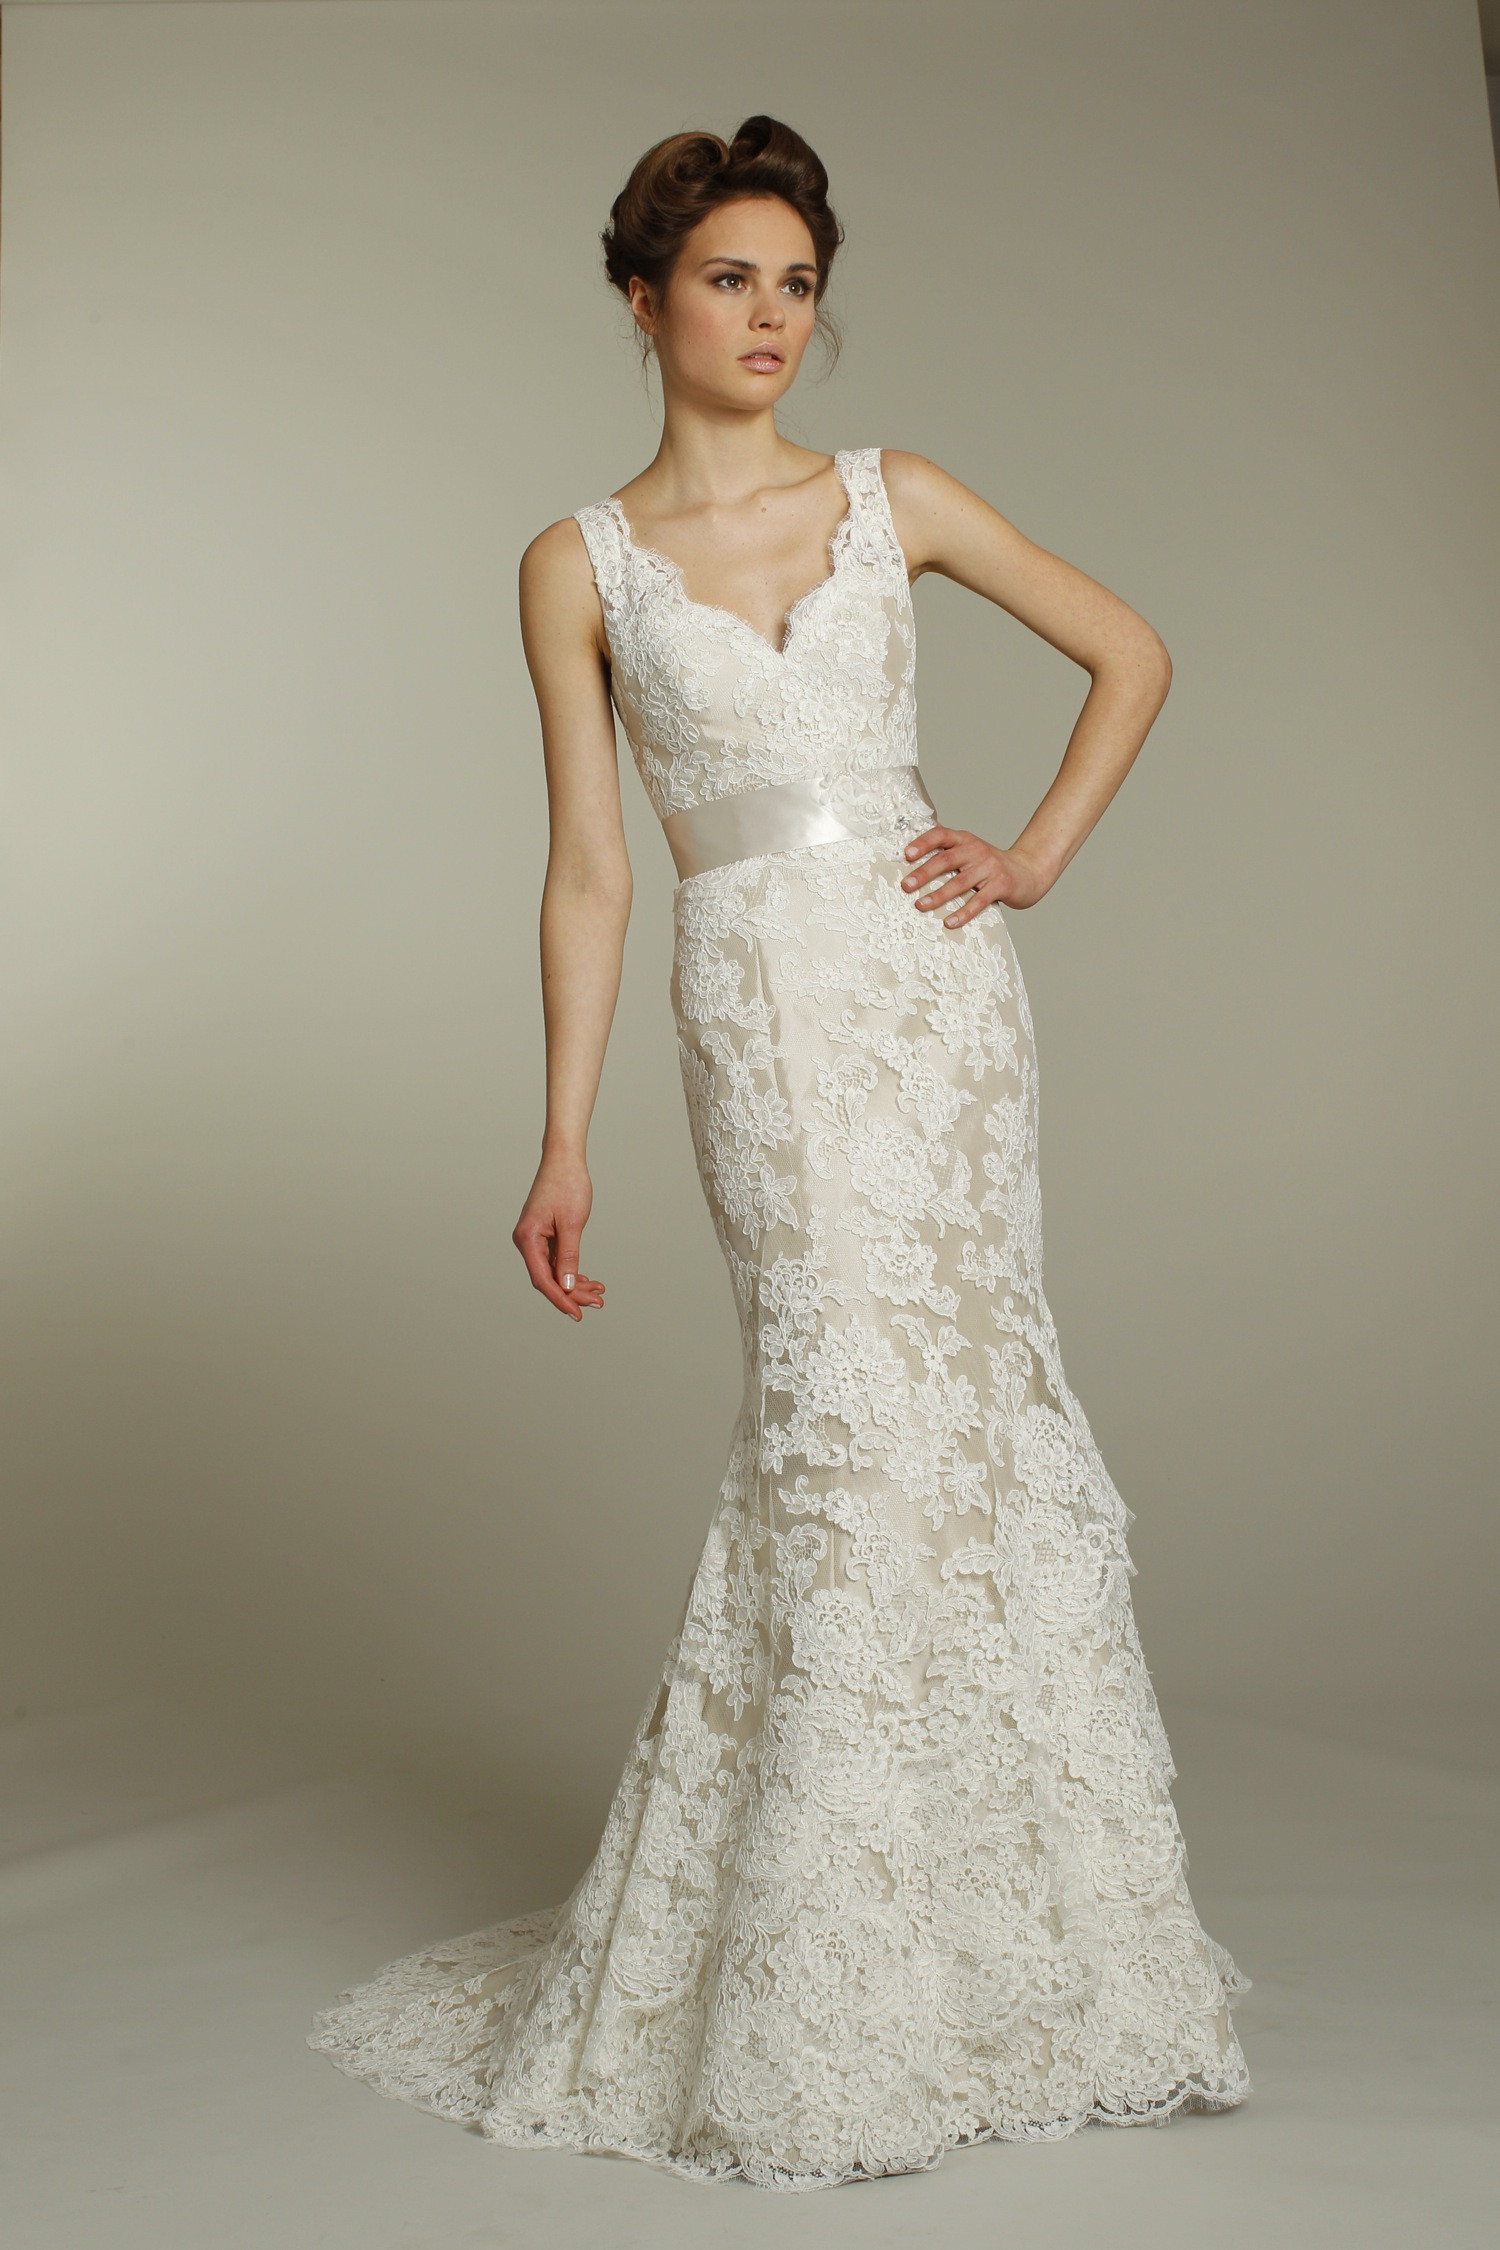 Ivory Lace Wedding Gowns
 Romantic ivory v neck lace wedding dress with champagne